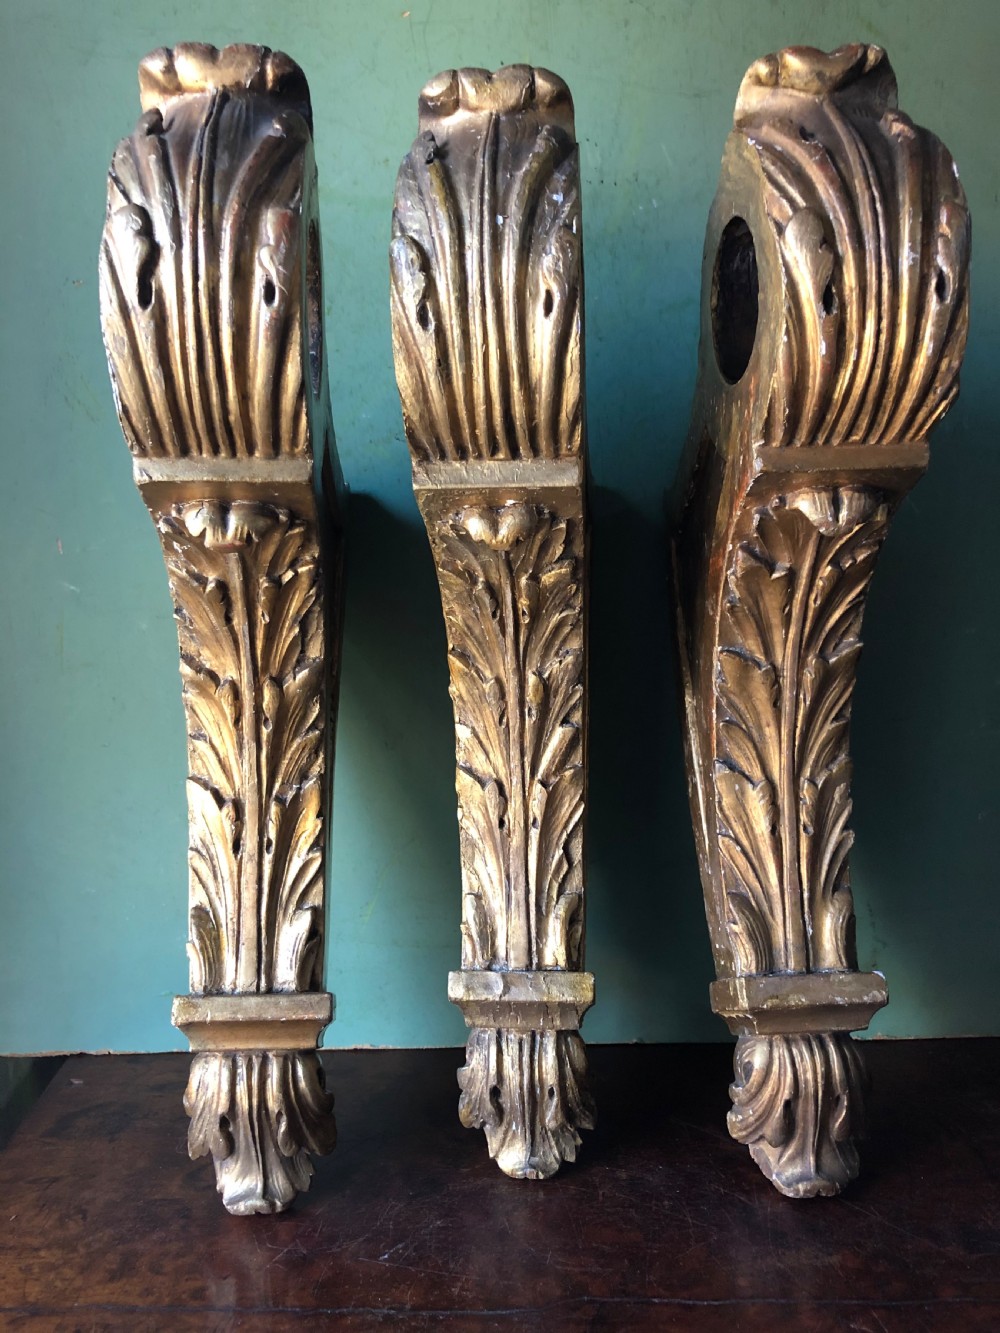 set of 3 mid c19th carved acanthusleaf decorated giltwood curtainpole brackets or supports